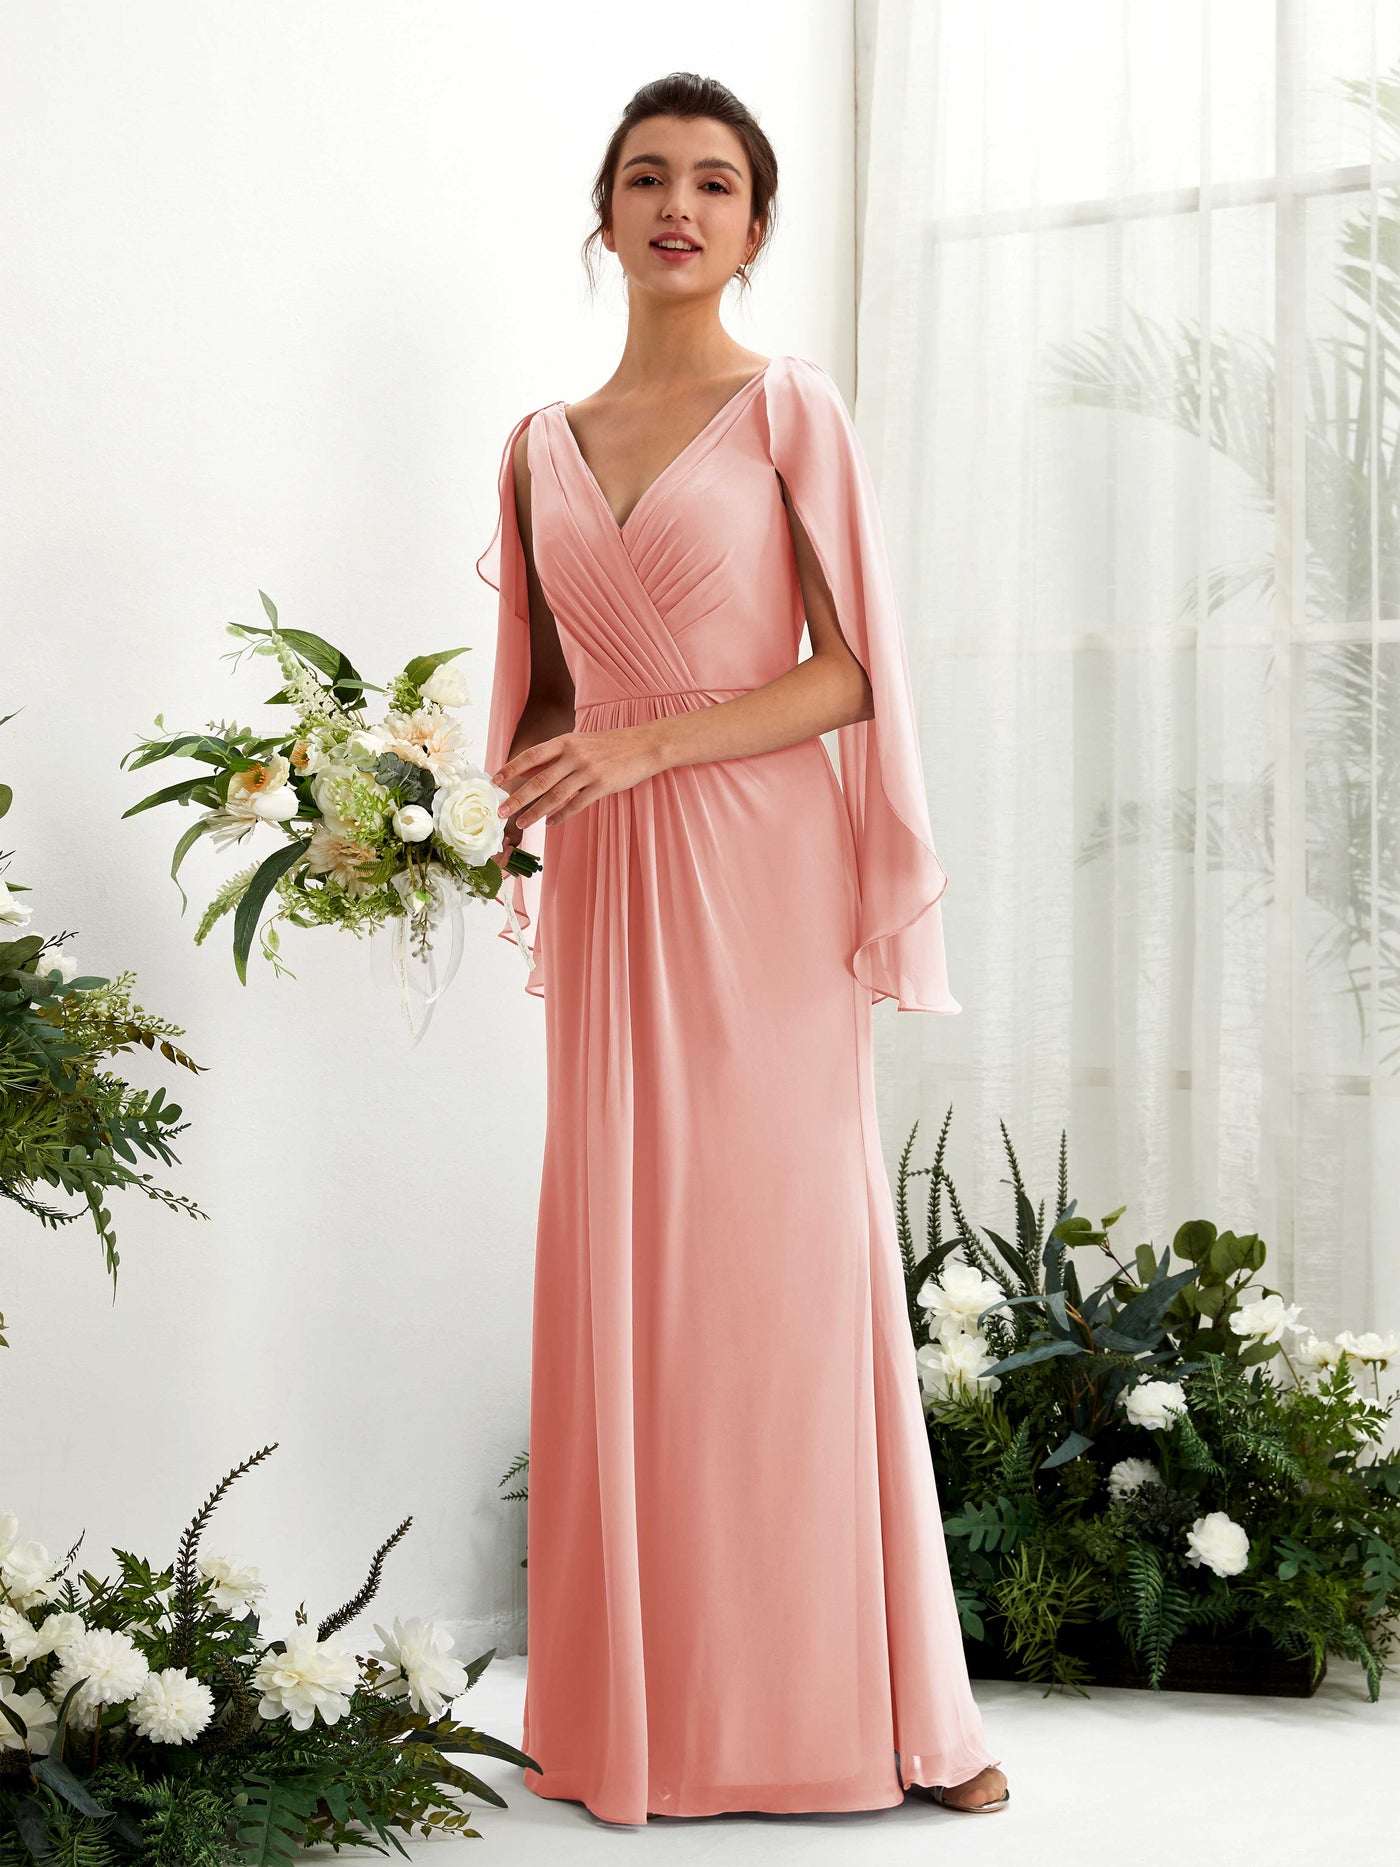 Champagne Rose Bridesmaid Dresses Bridesmaid Dress A-line Chiffon Straps Full Length Long Sleeves Wedding Party Dress (80220106)#color_champagne-rose